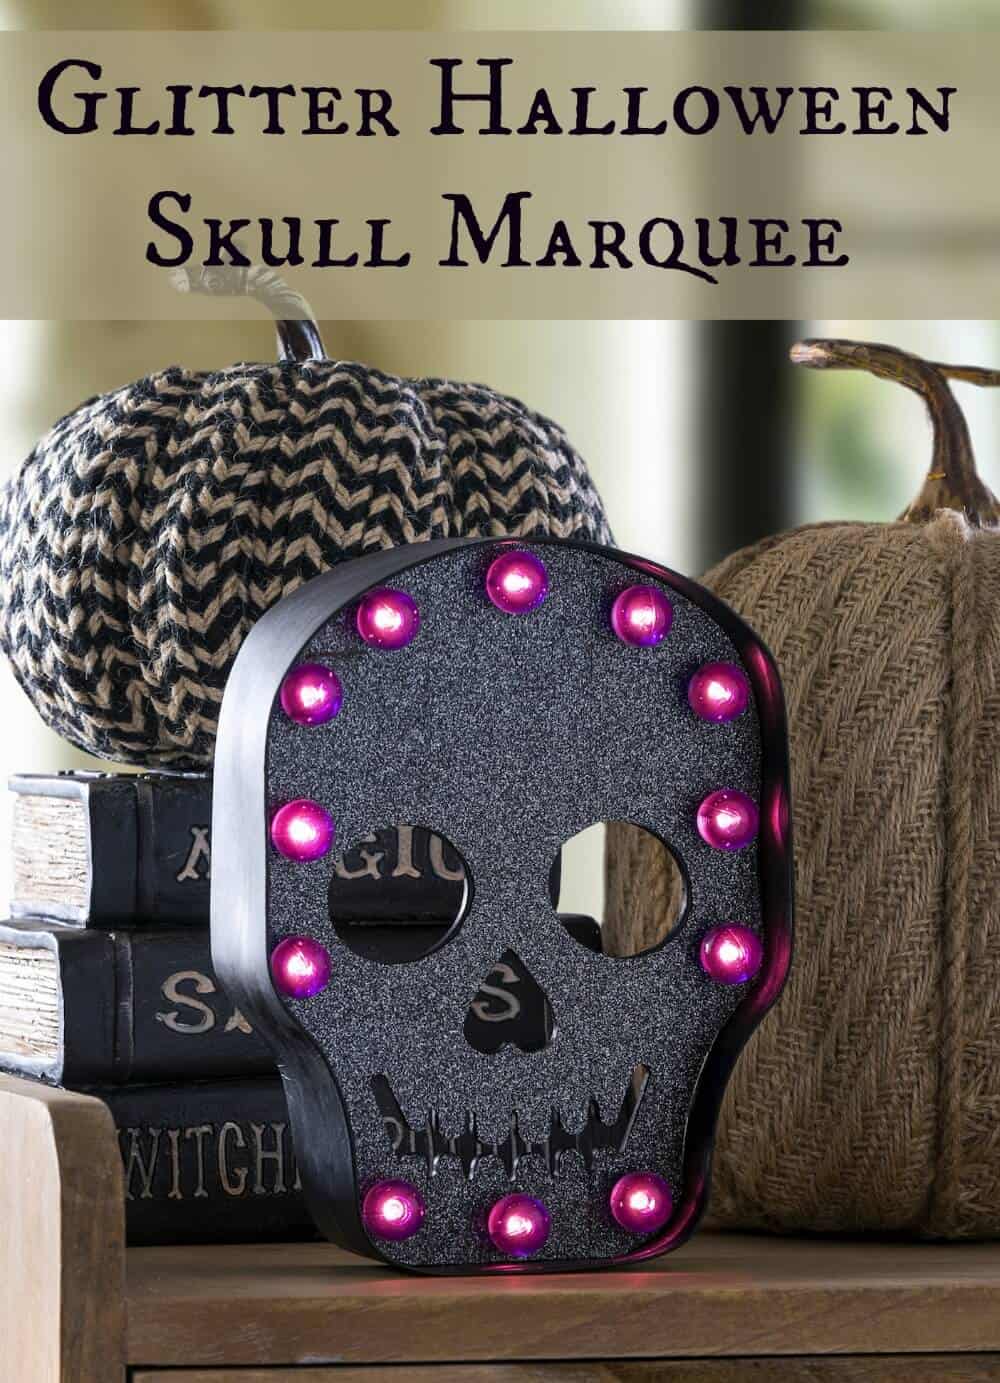 Glittery Halloween Skull Marquee in Minutes